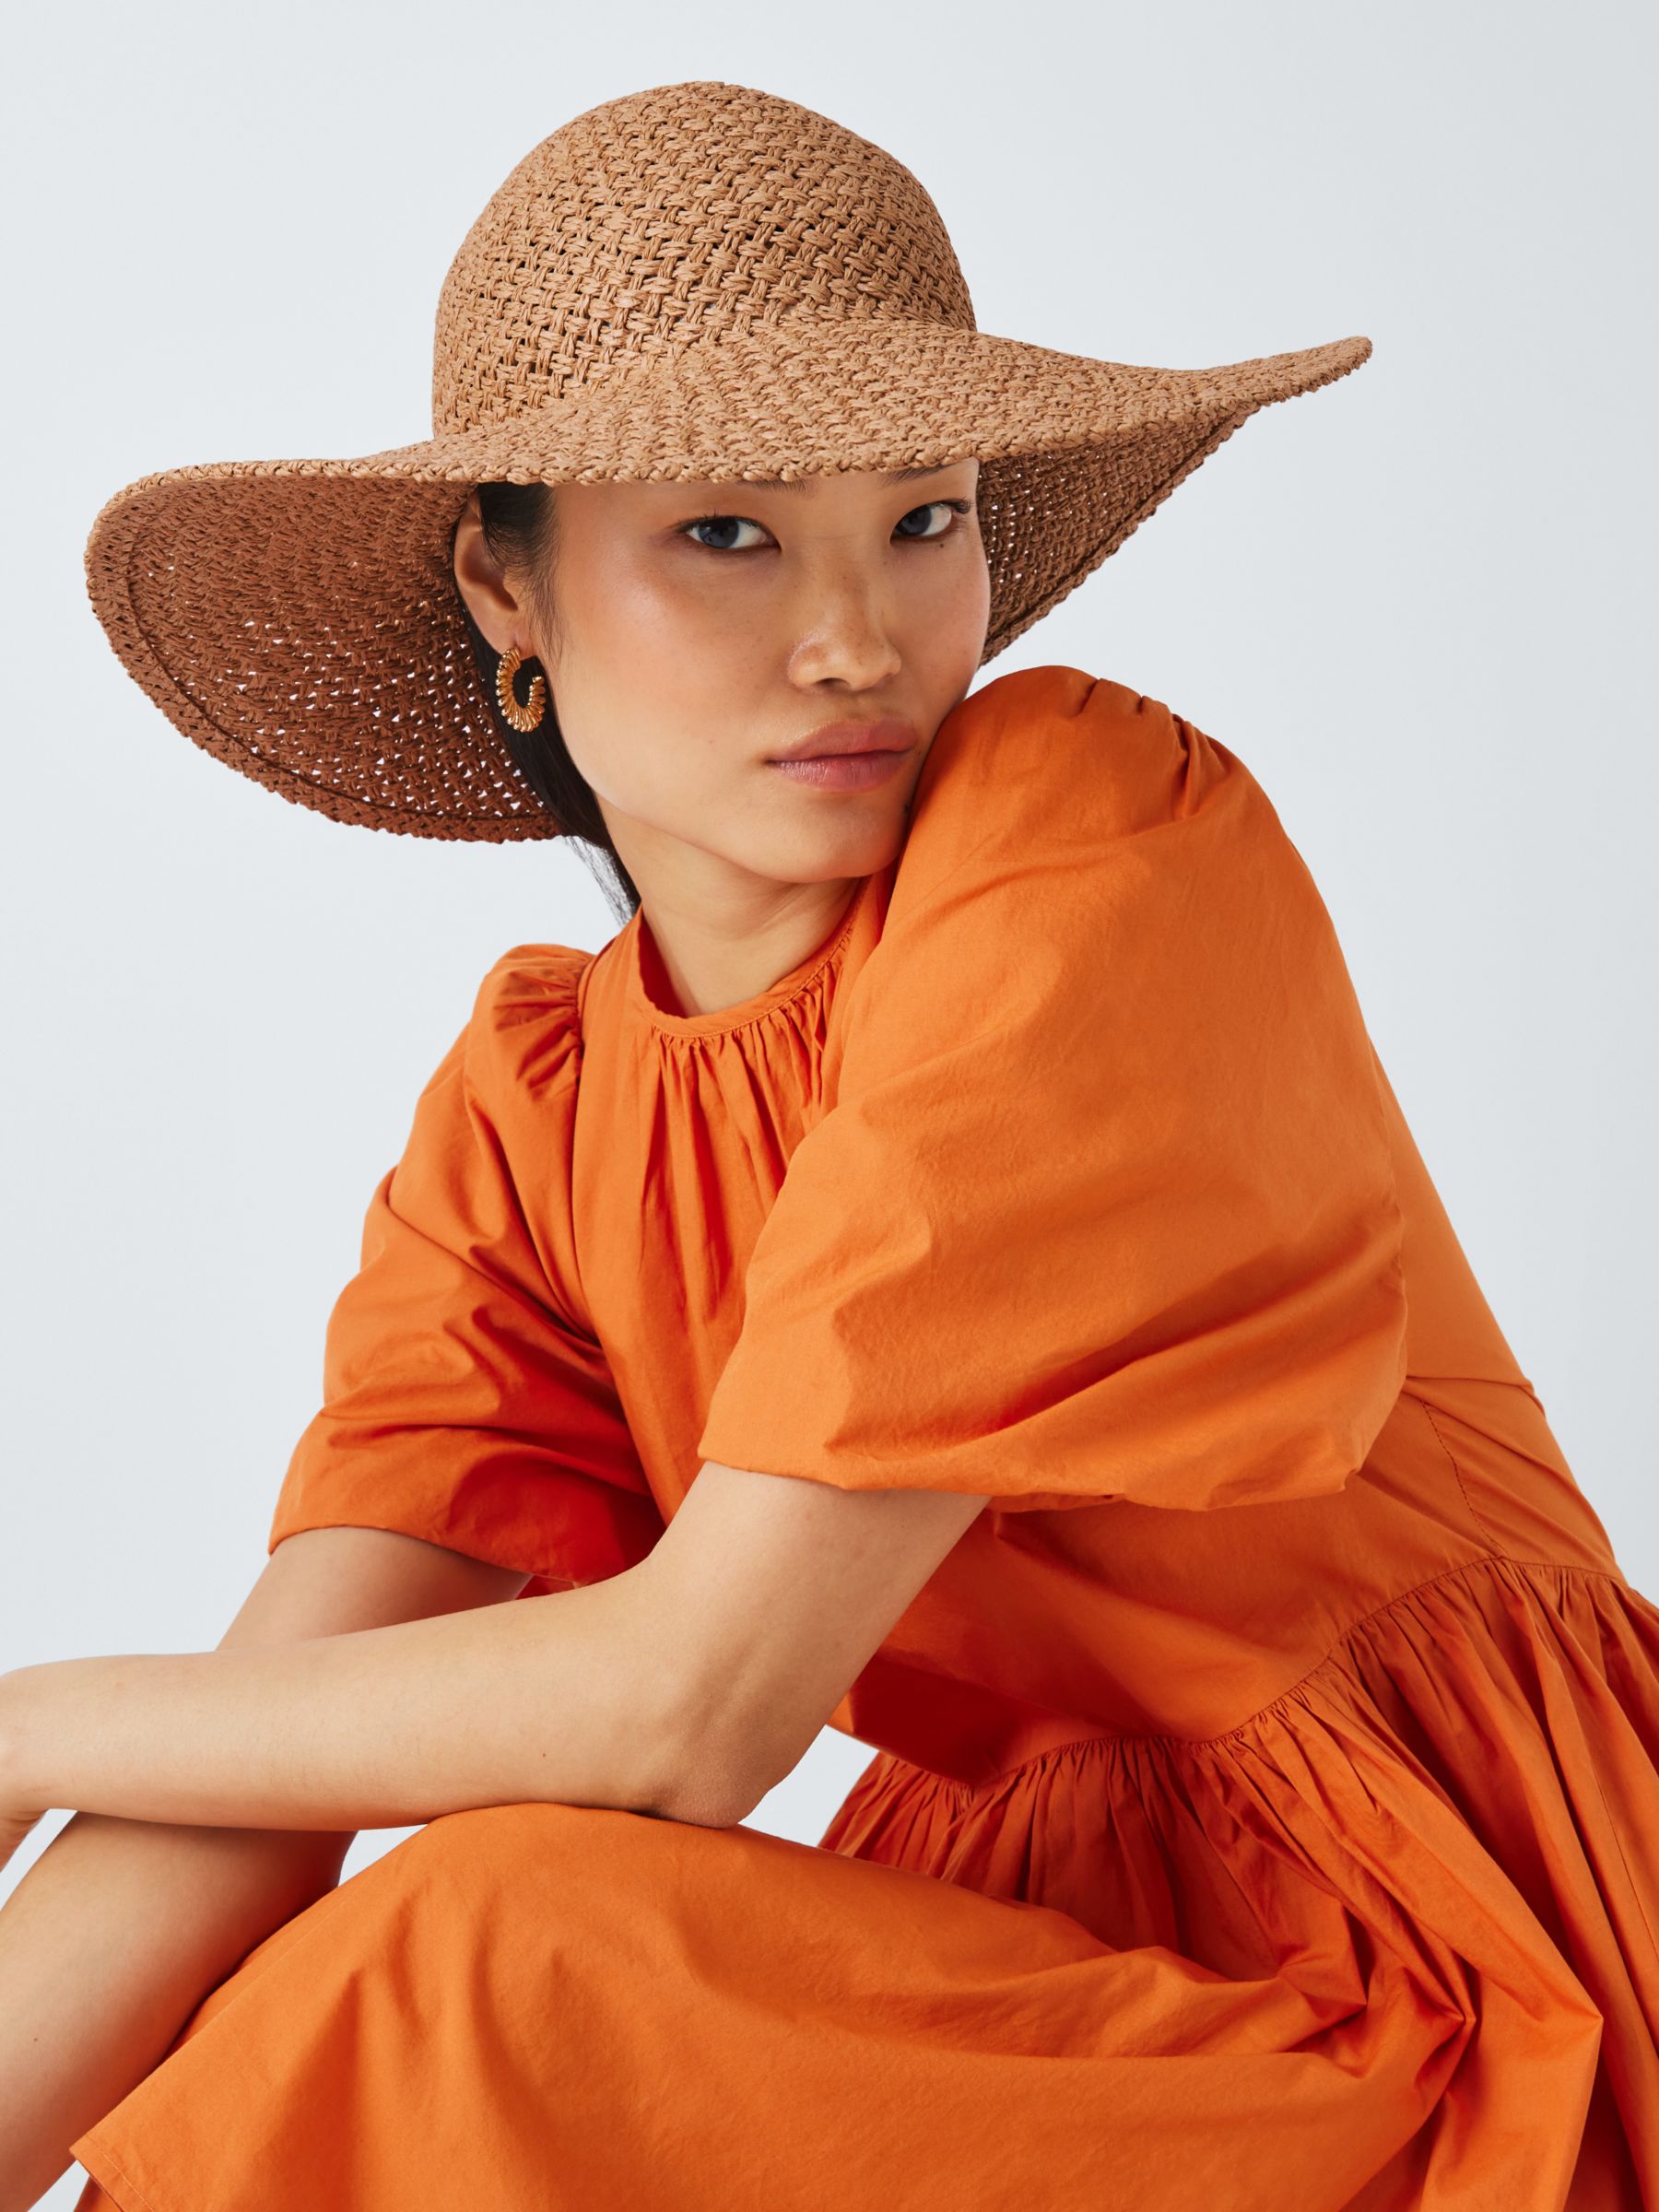 Buy John Lewis ANYDAY Woven Floppy Hat, FSC-Certified Online at johnlewis.com